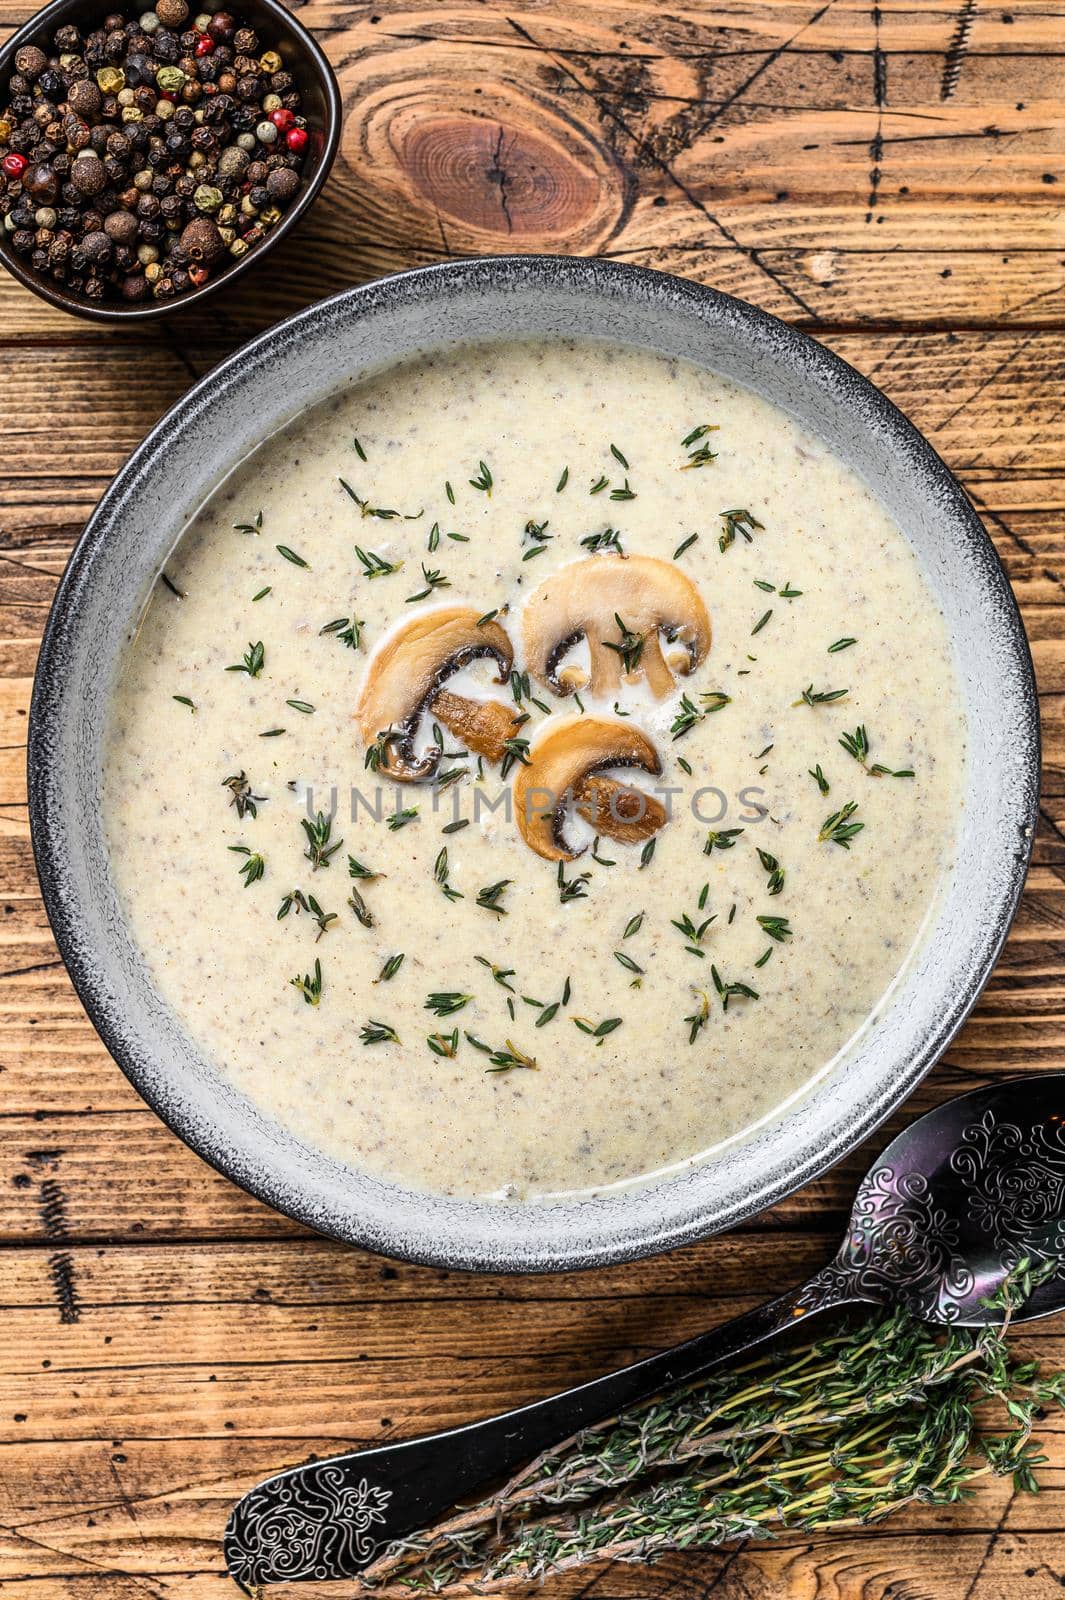 Mushroom cream soup in a plate. Wooden background. Top view.